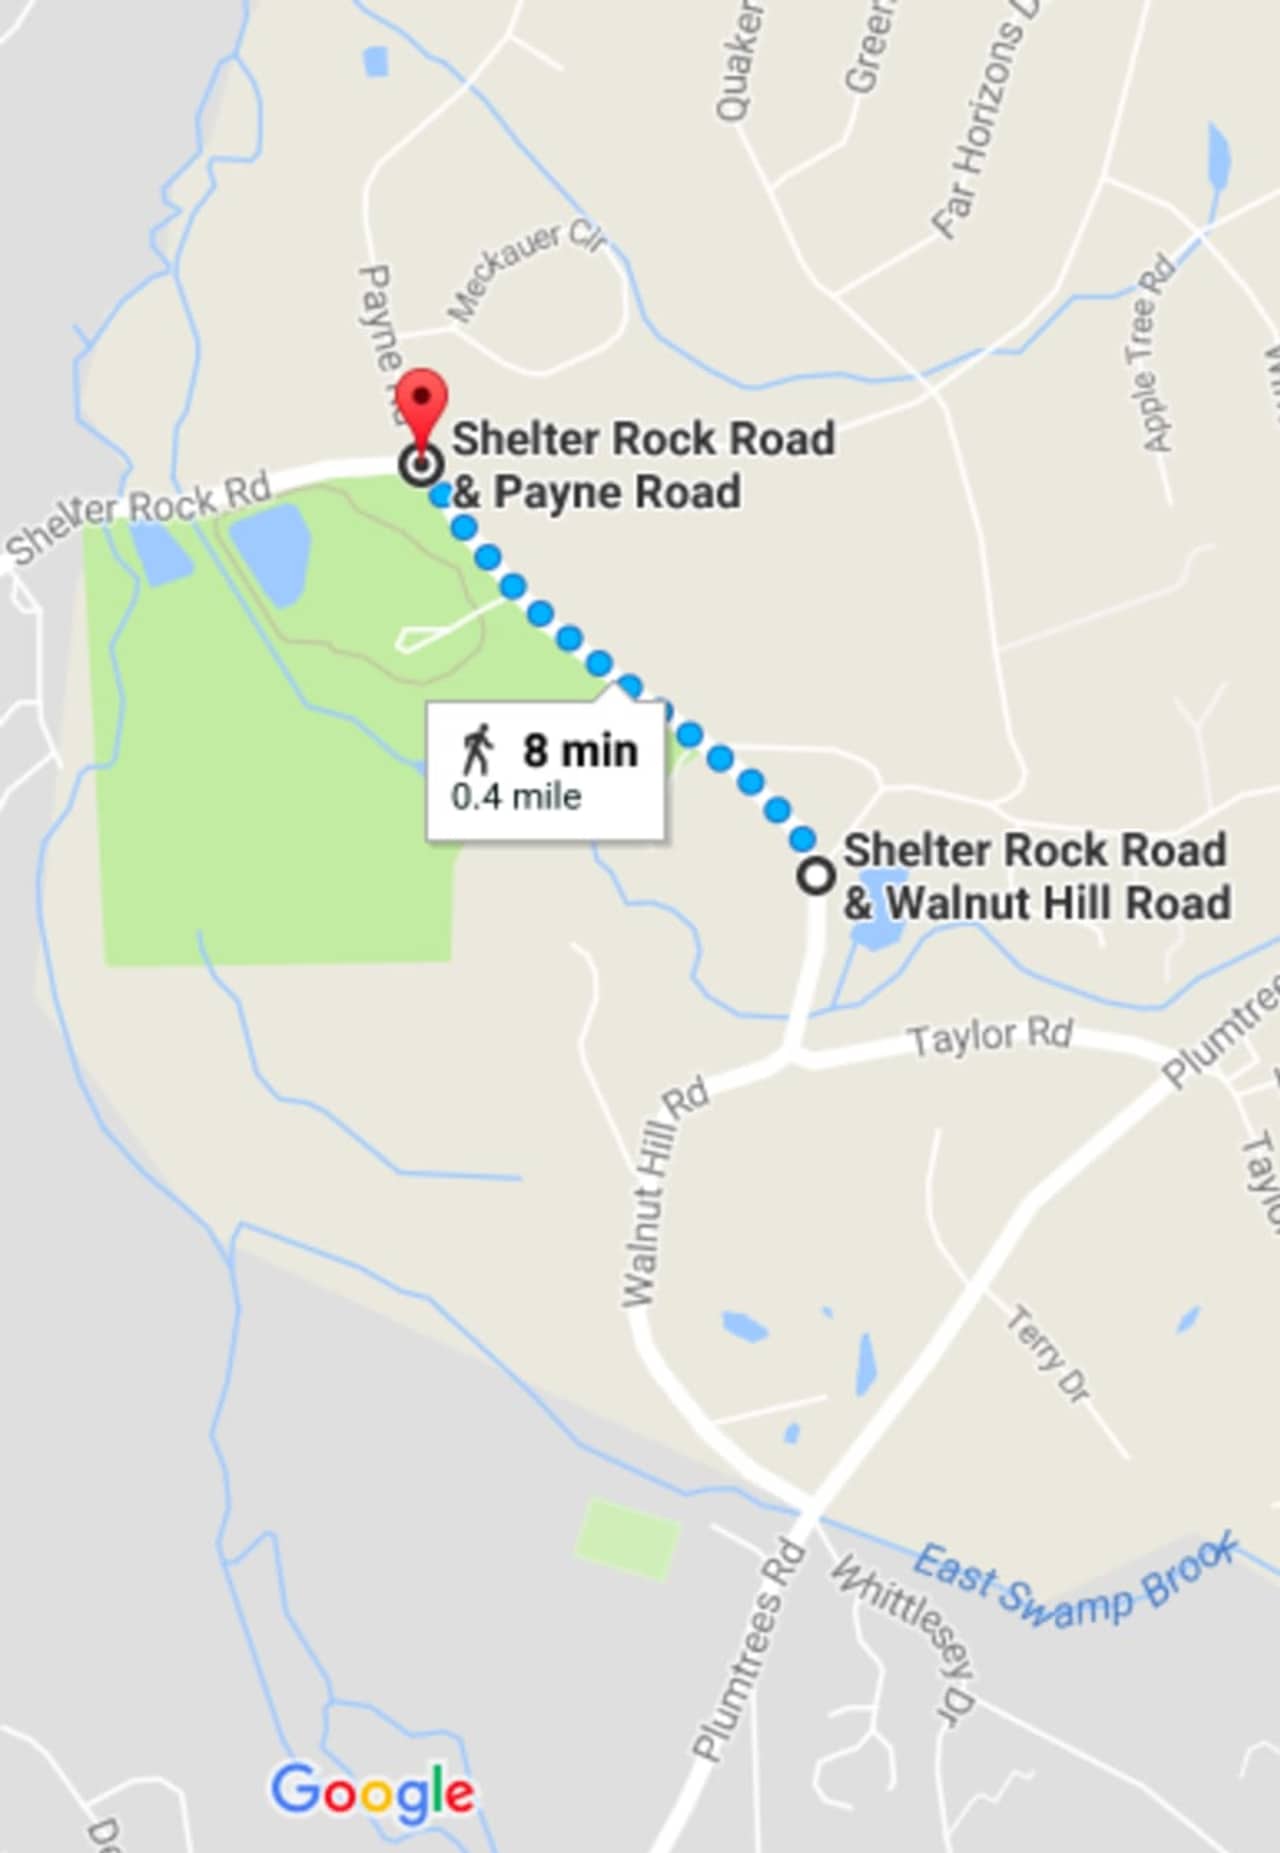 Shelter Rock Road will be closed near Meckauer Park in Bethel starting Monday.